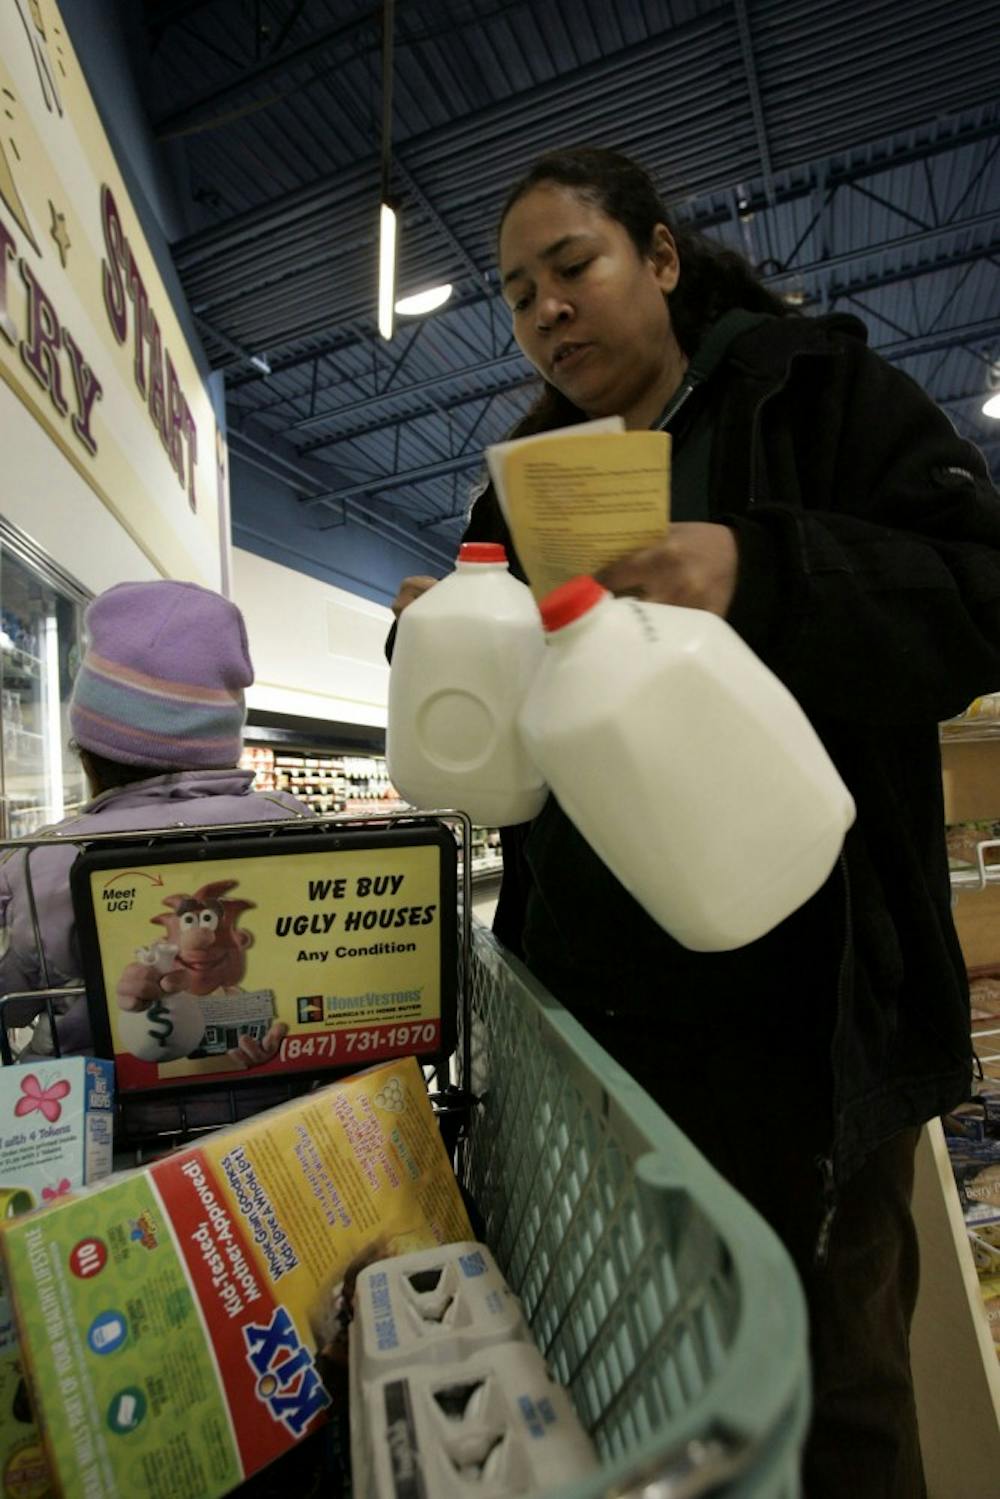 Markita Barret uses food stamps to feed herself, her roommate and two children. MCT PHOTO